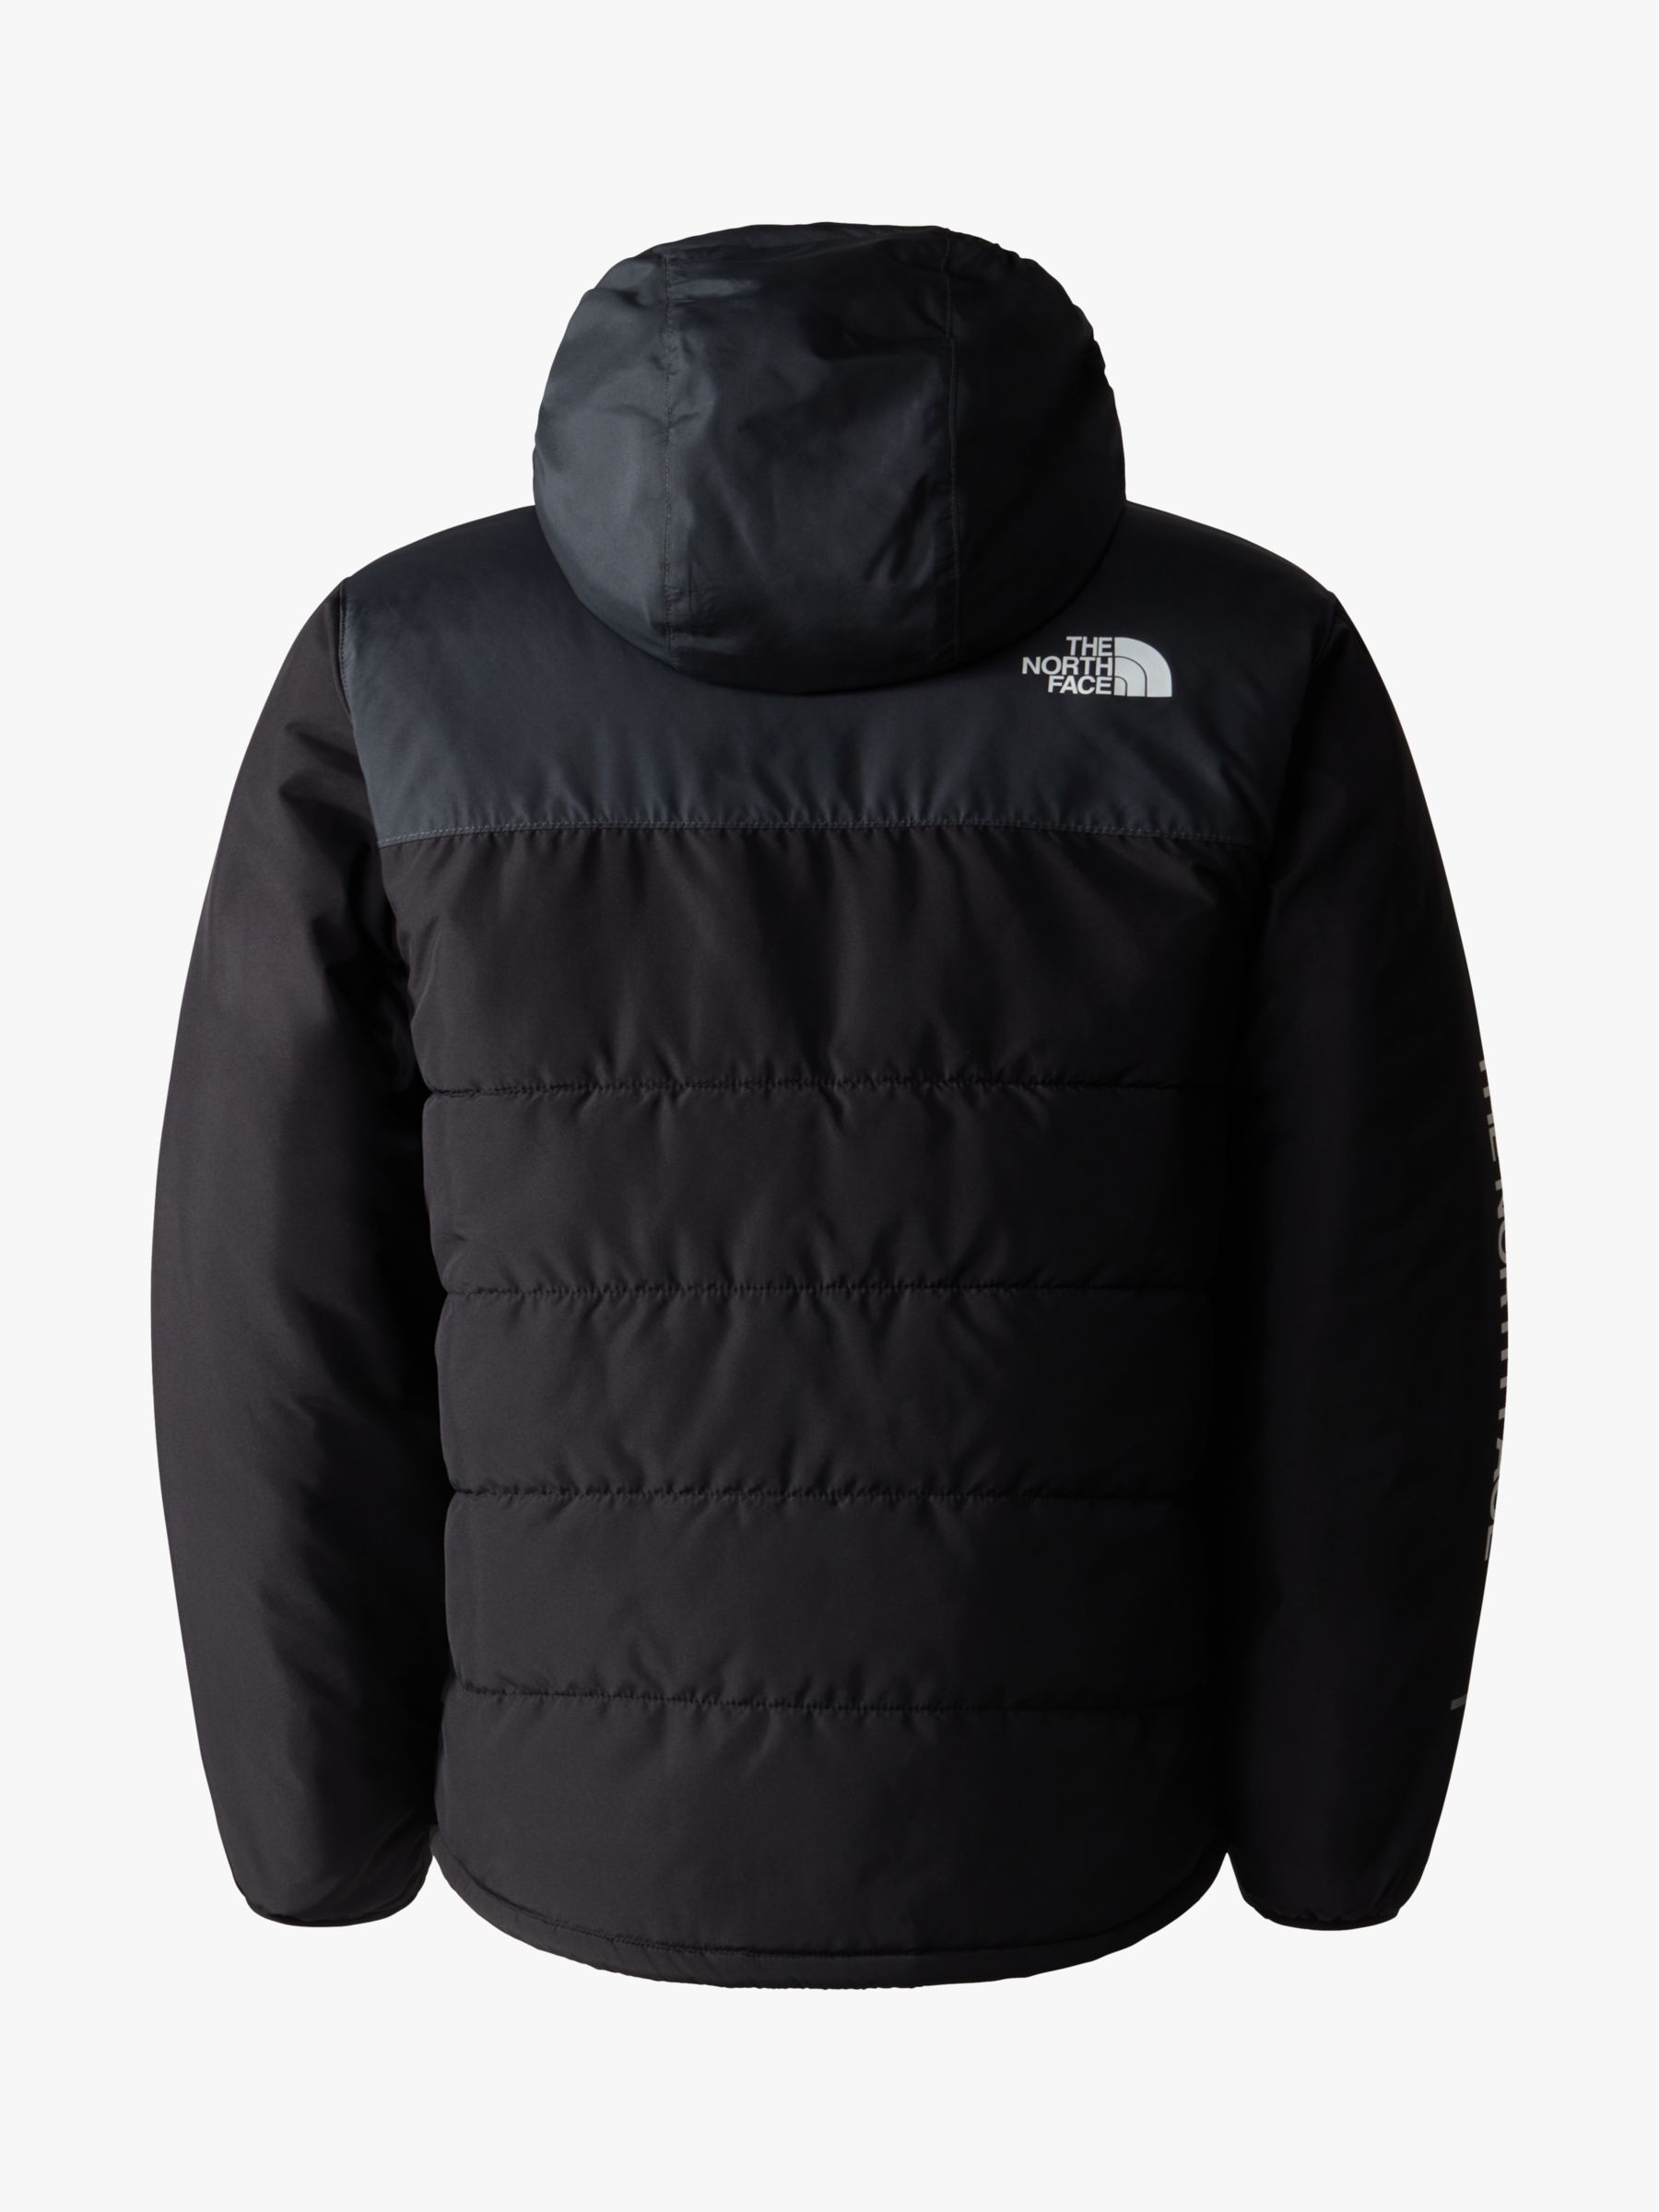 The North Face Kids' Never Stop Insulated Jacket, Grey/Black at John ...